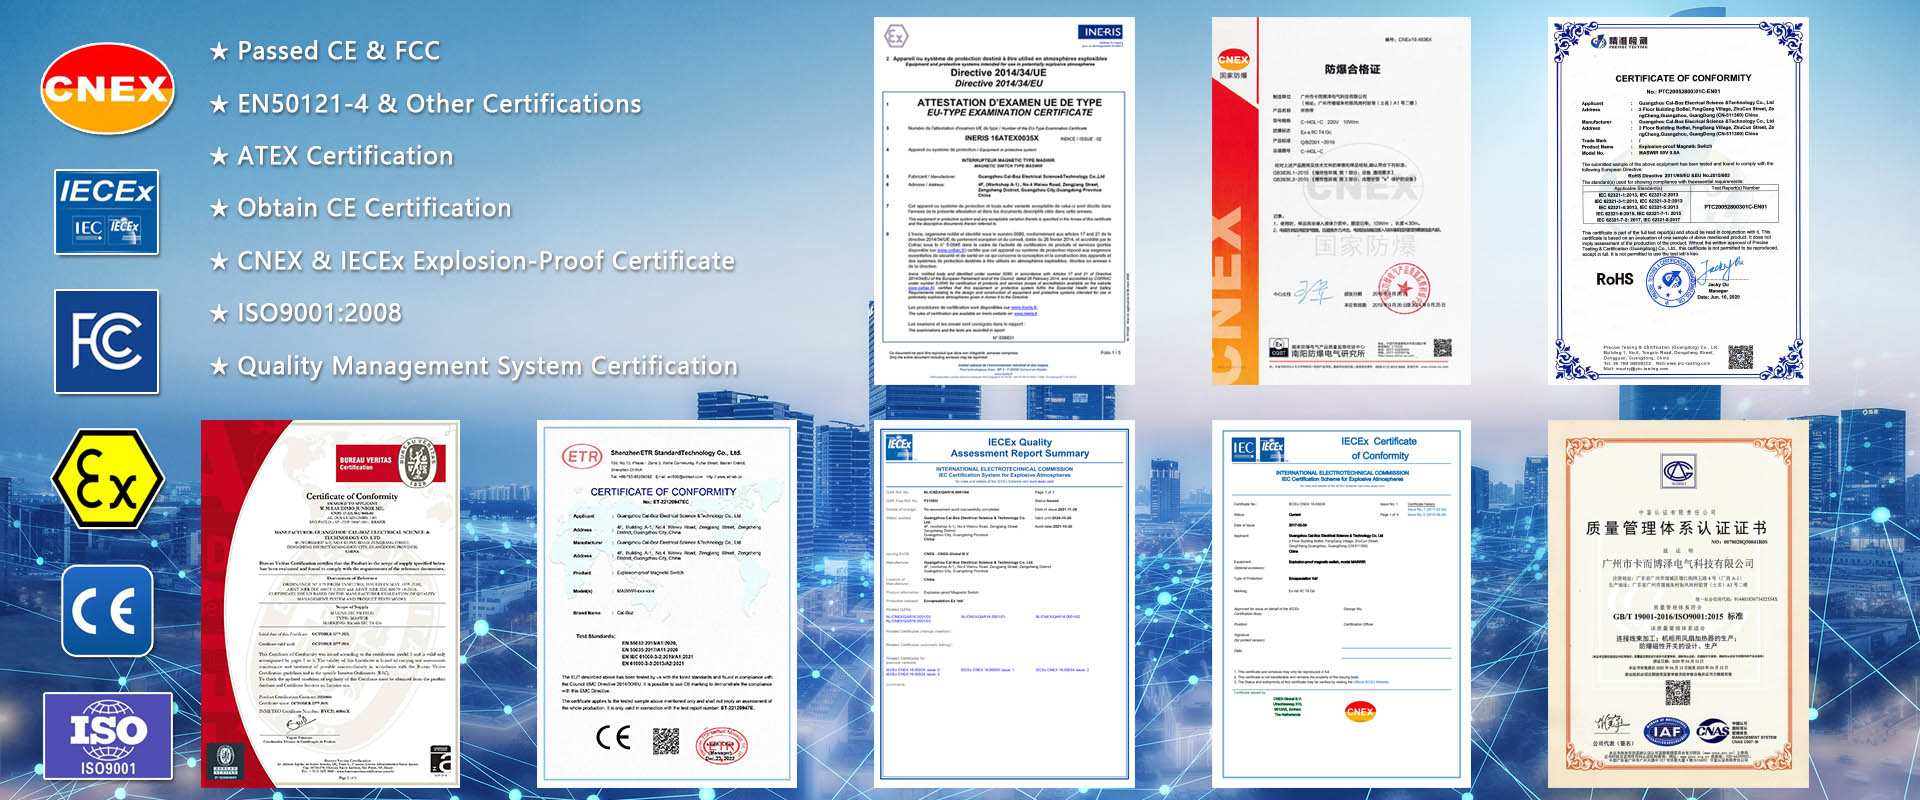 ATEX Certification & Distribution Certificate & Explosion-Proof Certificate & Fan Heater CE Certification & IECEx CNEX Certificate & Product Quality Assurance Notification